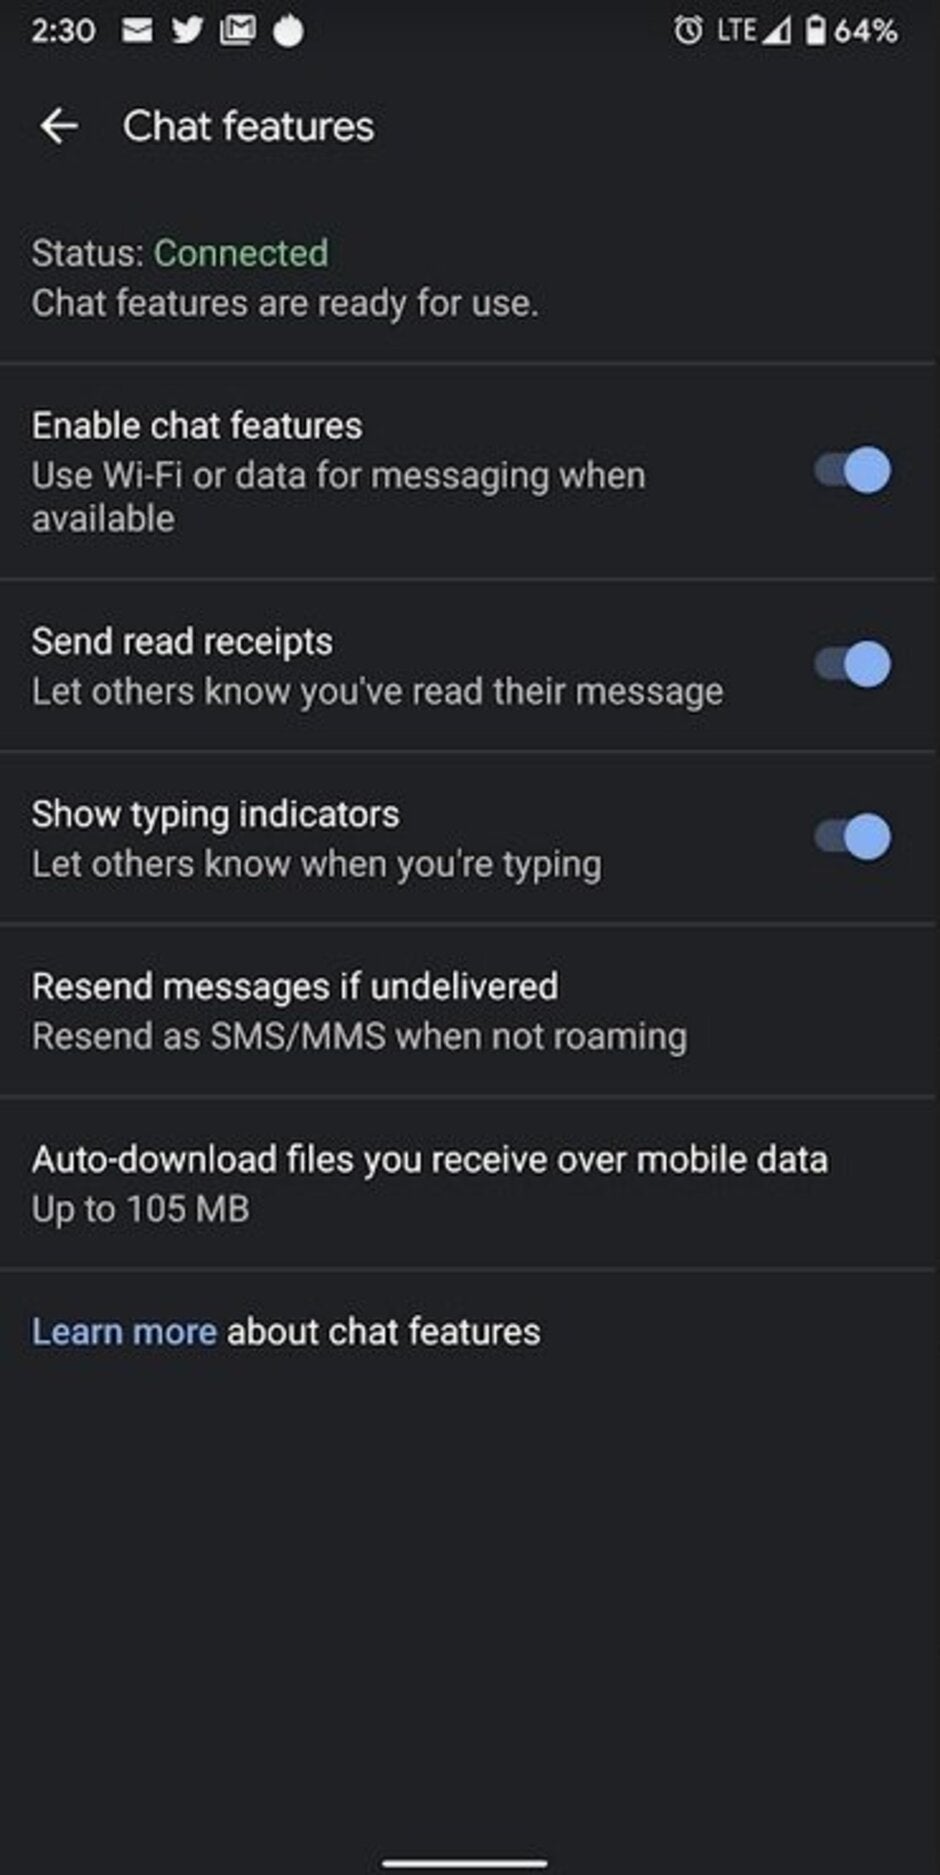 Even if you already enabled RCS on your Android phone, you will take part in Google&#039;s official RCS Chat rollout - Google starts pushing out RCS Chat to all Android phones in the U.S.